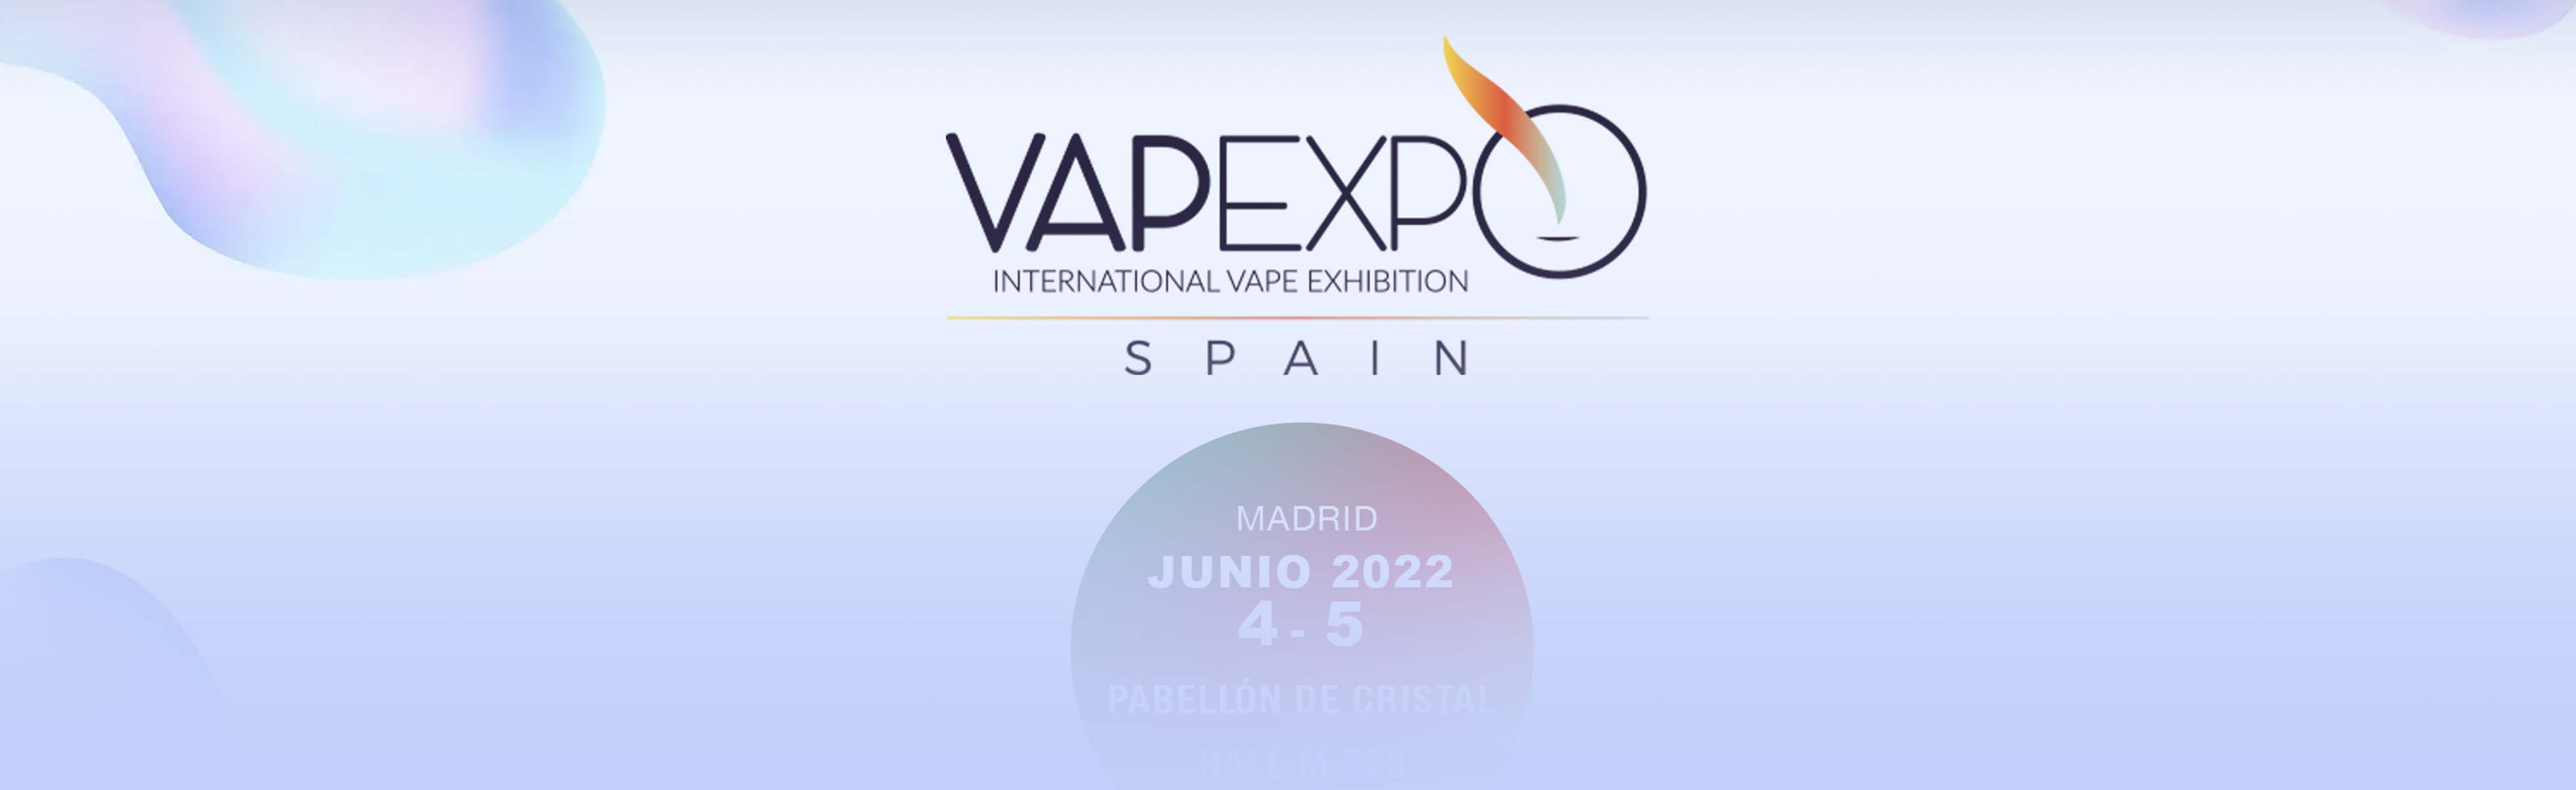 Hangsen was invited to attend the VAPEXPO 2022